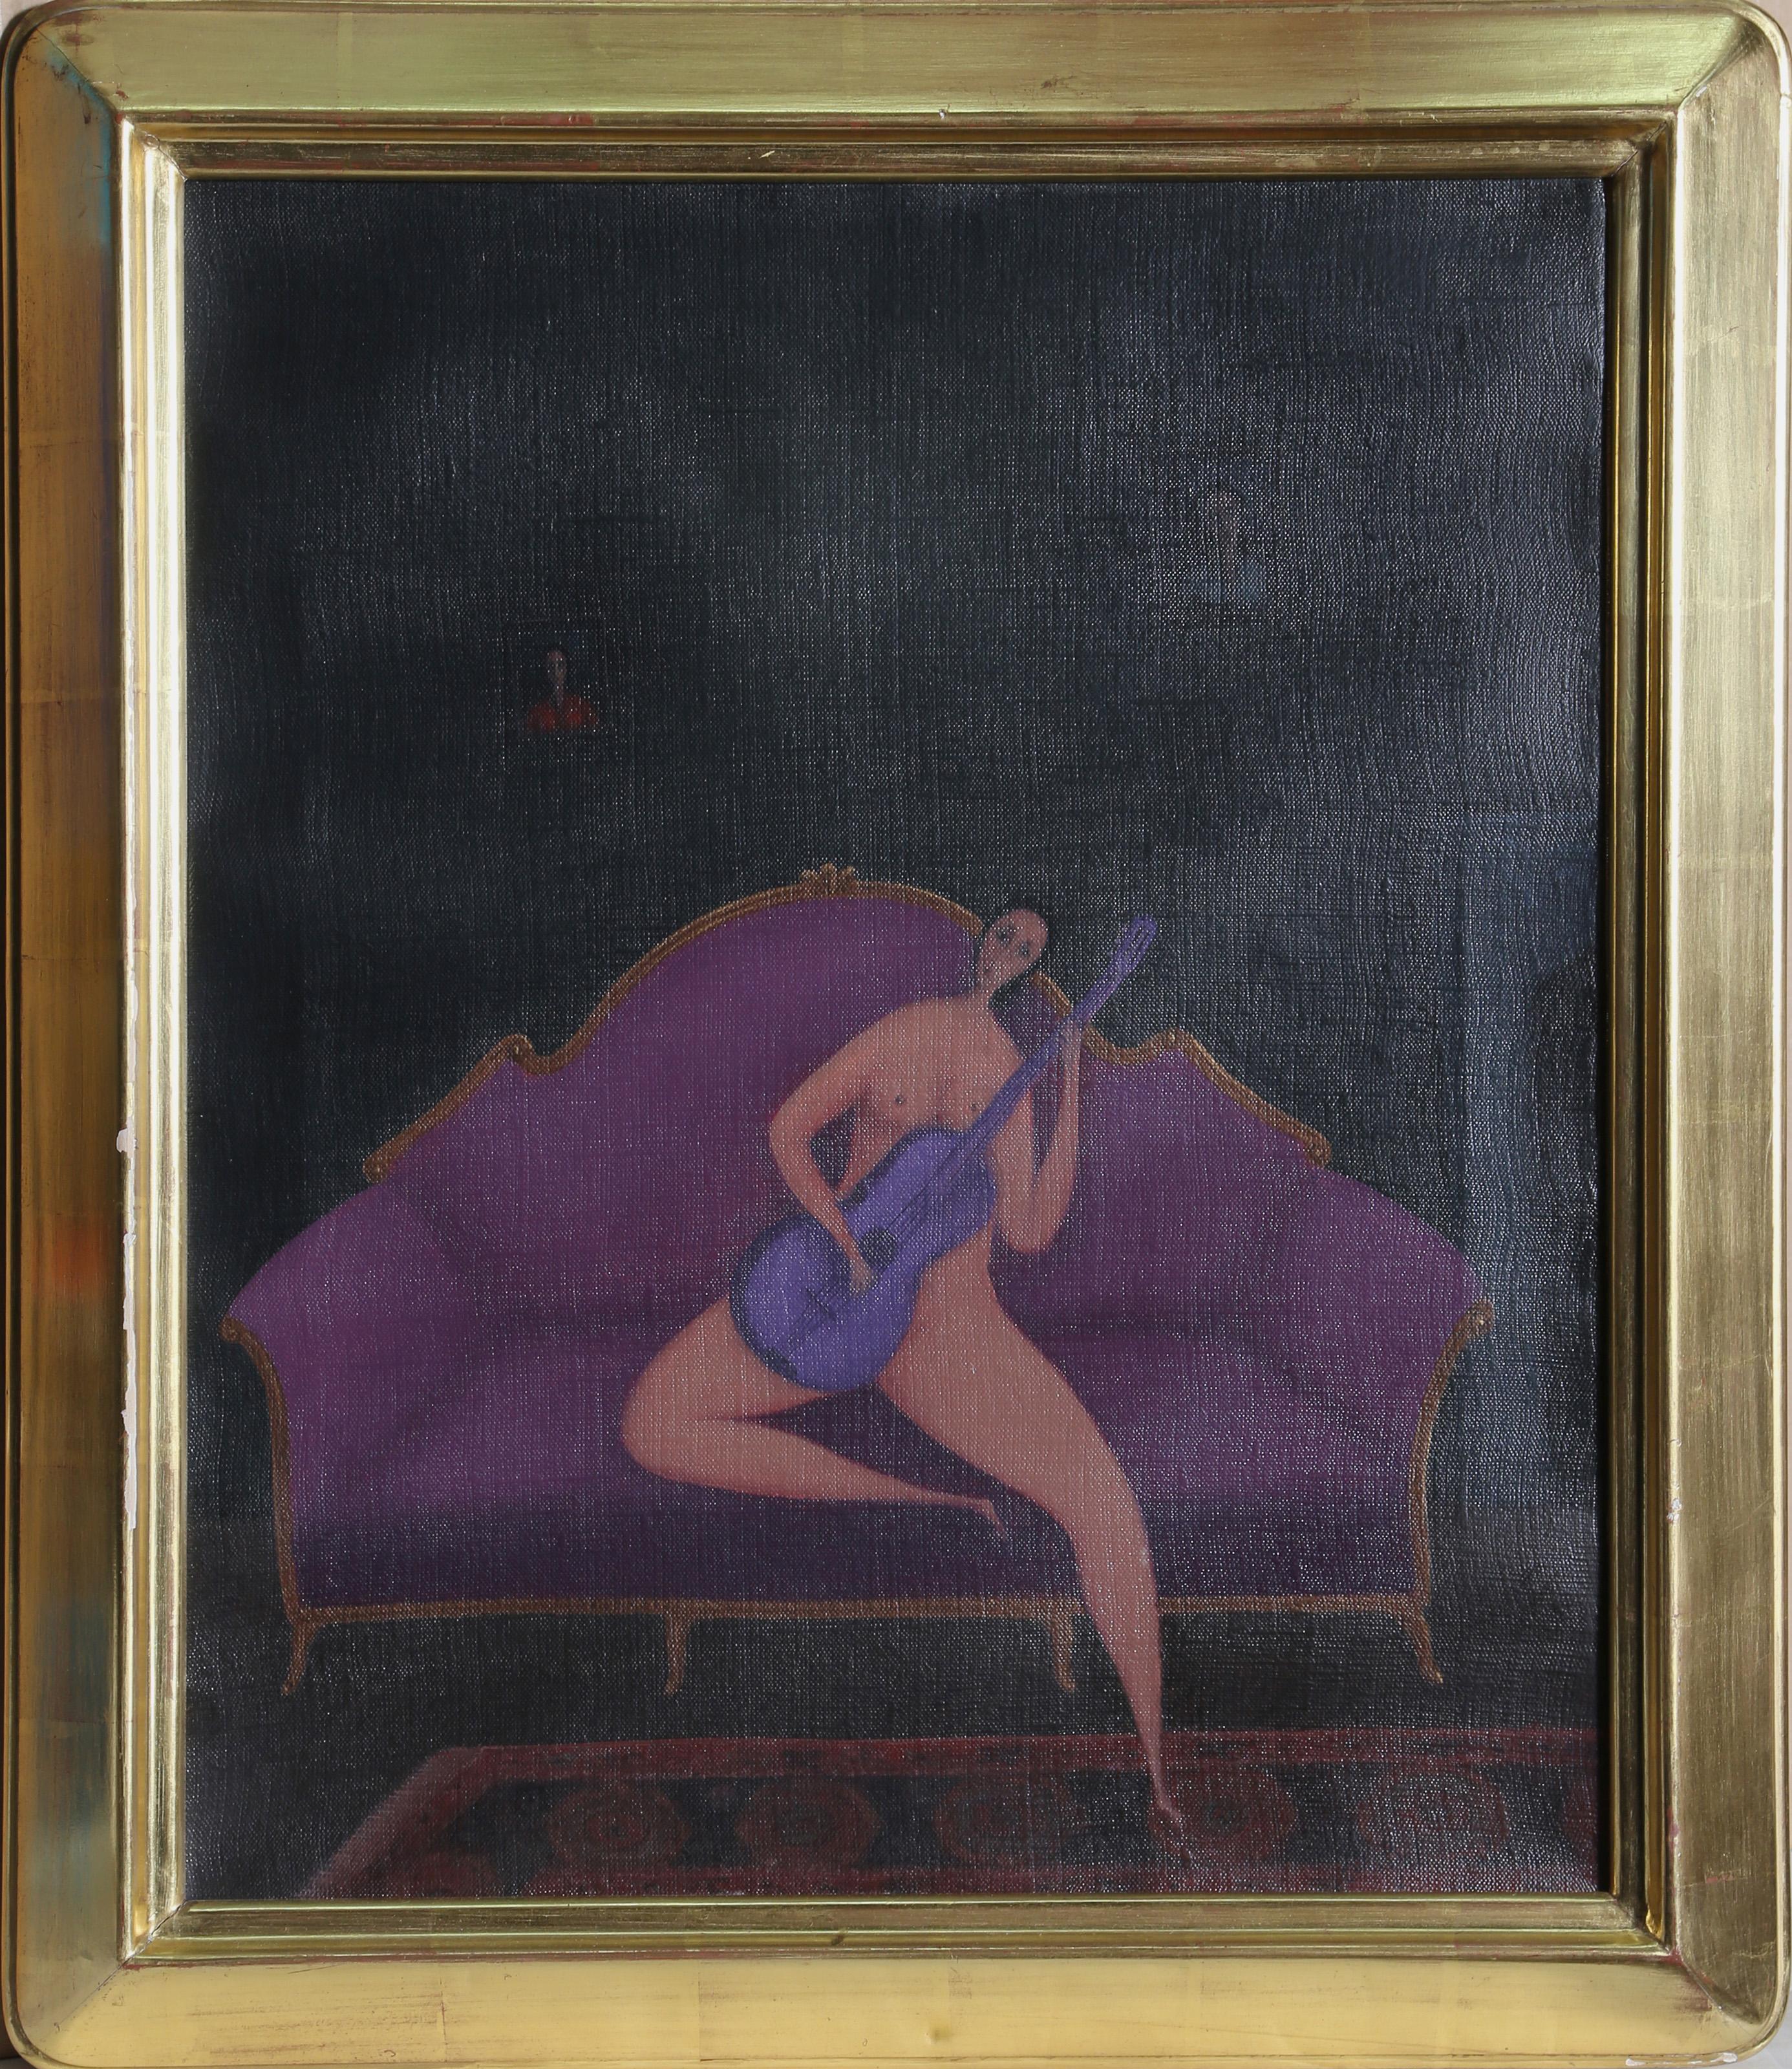 Branko Bahunek, Croatian (1935 - ) -  Nude Guitar Player. Year: 1986, Medium: Oil on Canvas, signed and dated, Size: 21.5  x 18 in. (54.61  x 45.72 cm), Frame Size: 26 x 22 inches 